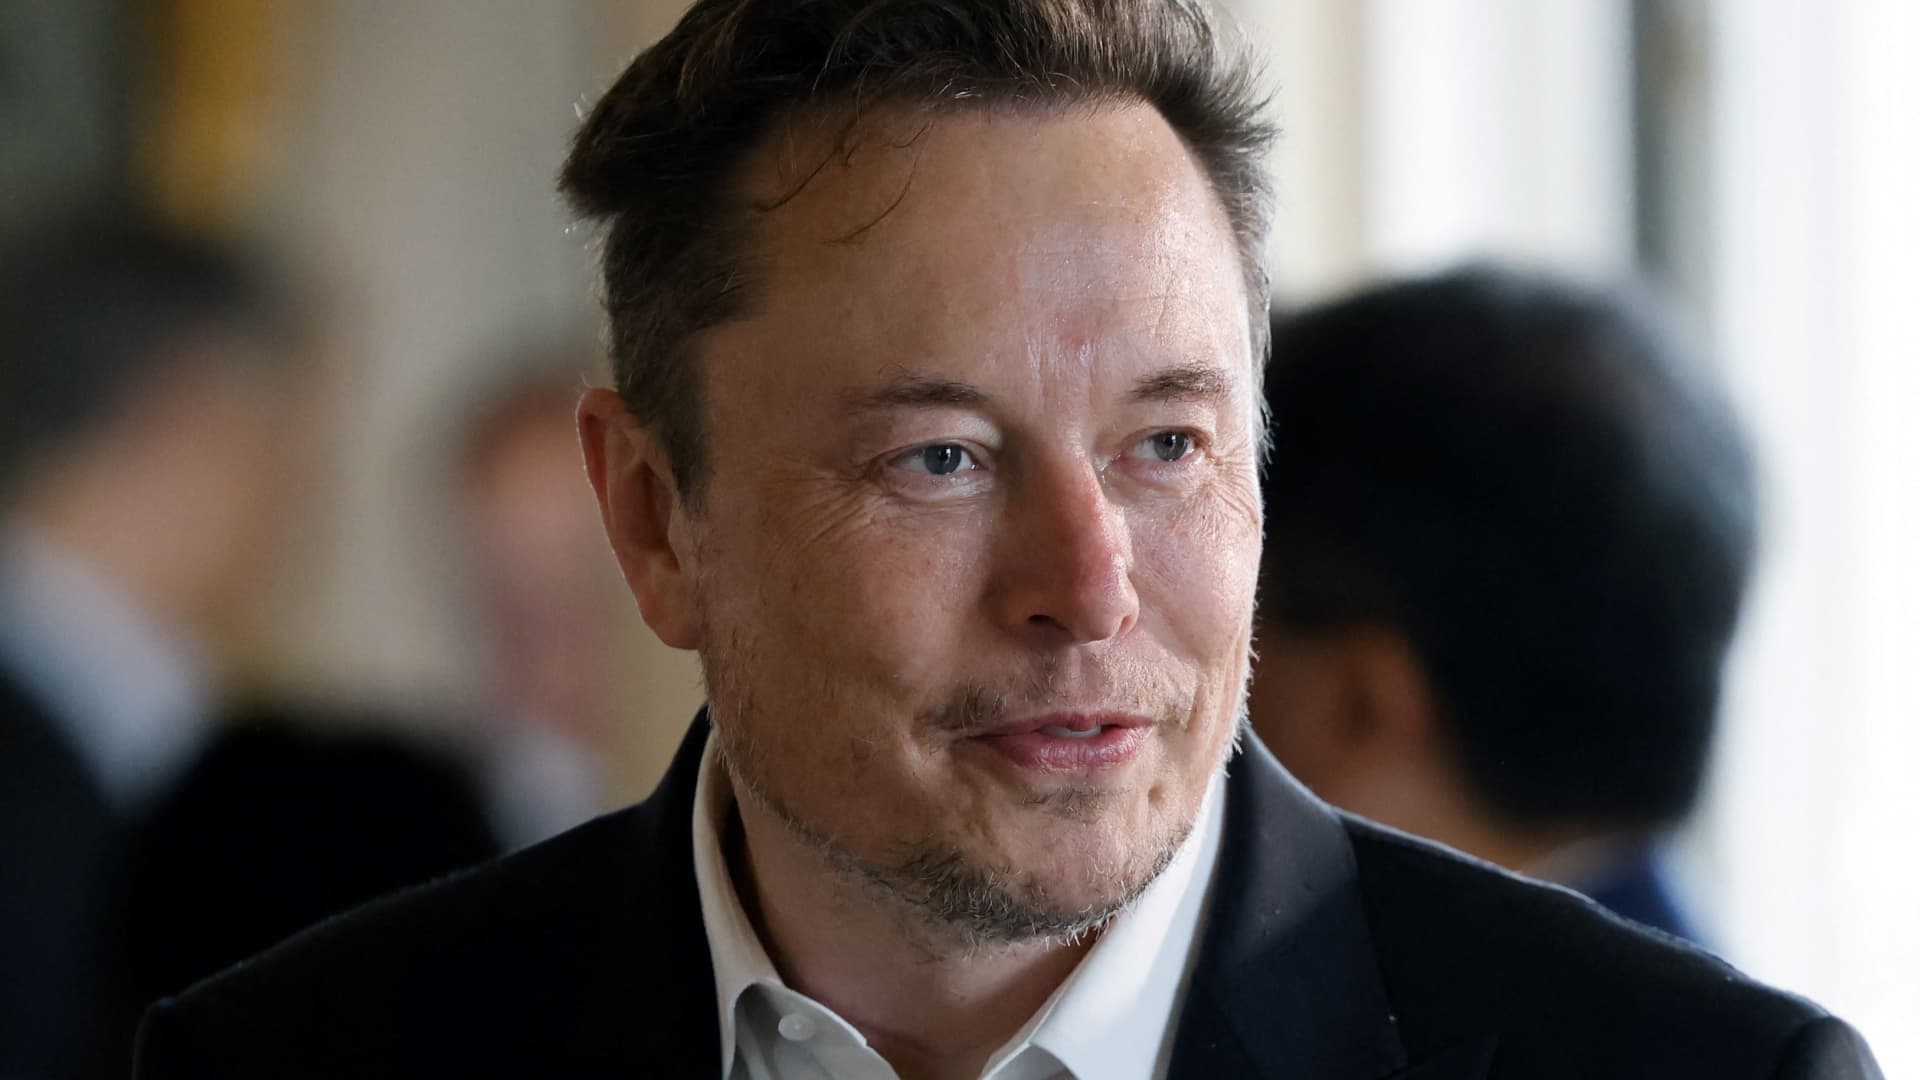 Elon Musk met with Italy prime minister to talk A.I., birth rates, as hunt for new factory location continues